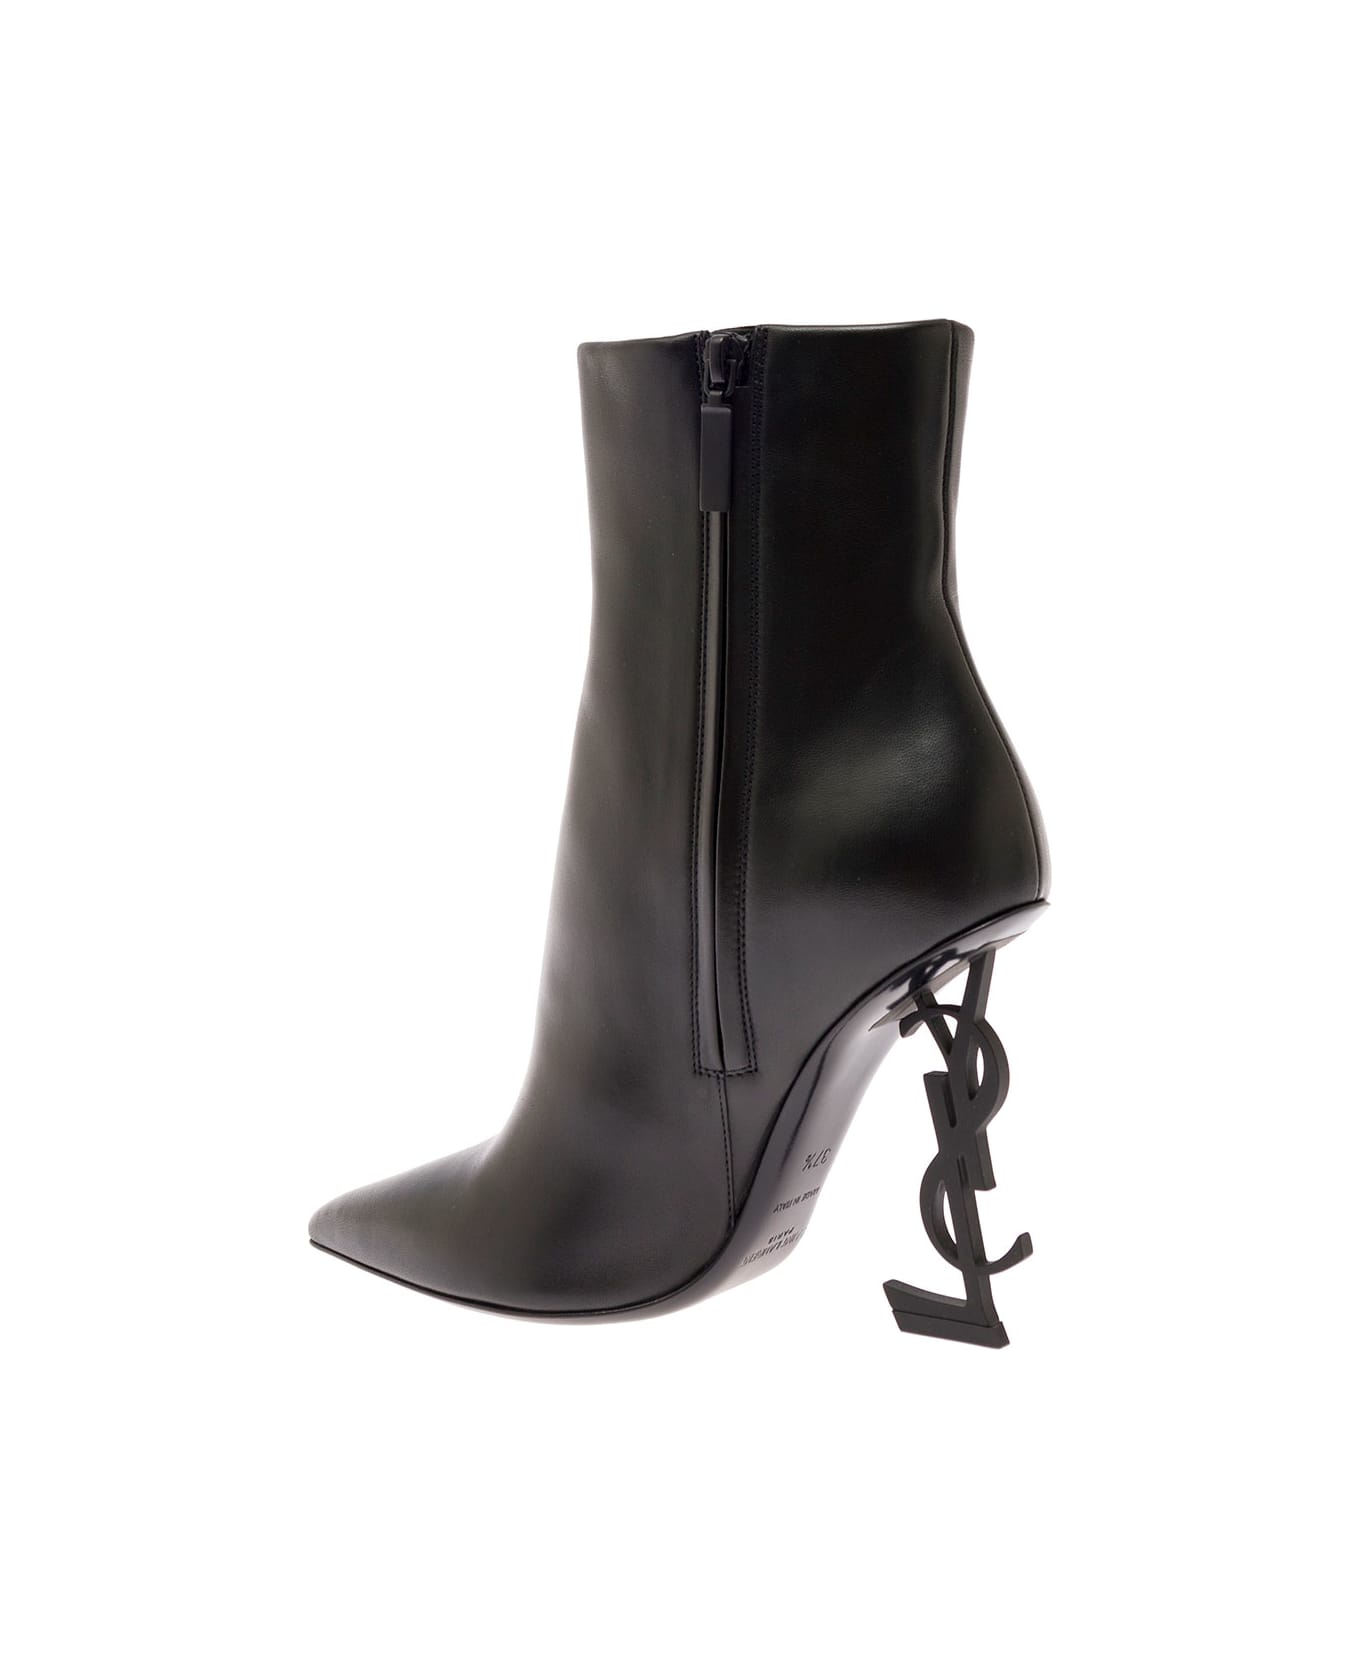 Saint Laurent 'opyum' Black Boots With Cassandre Heel In Leather Woman - Black ブーツ